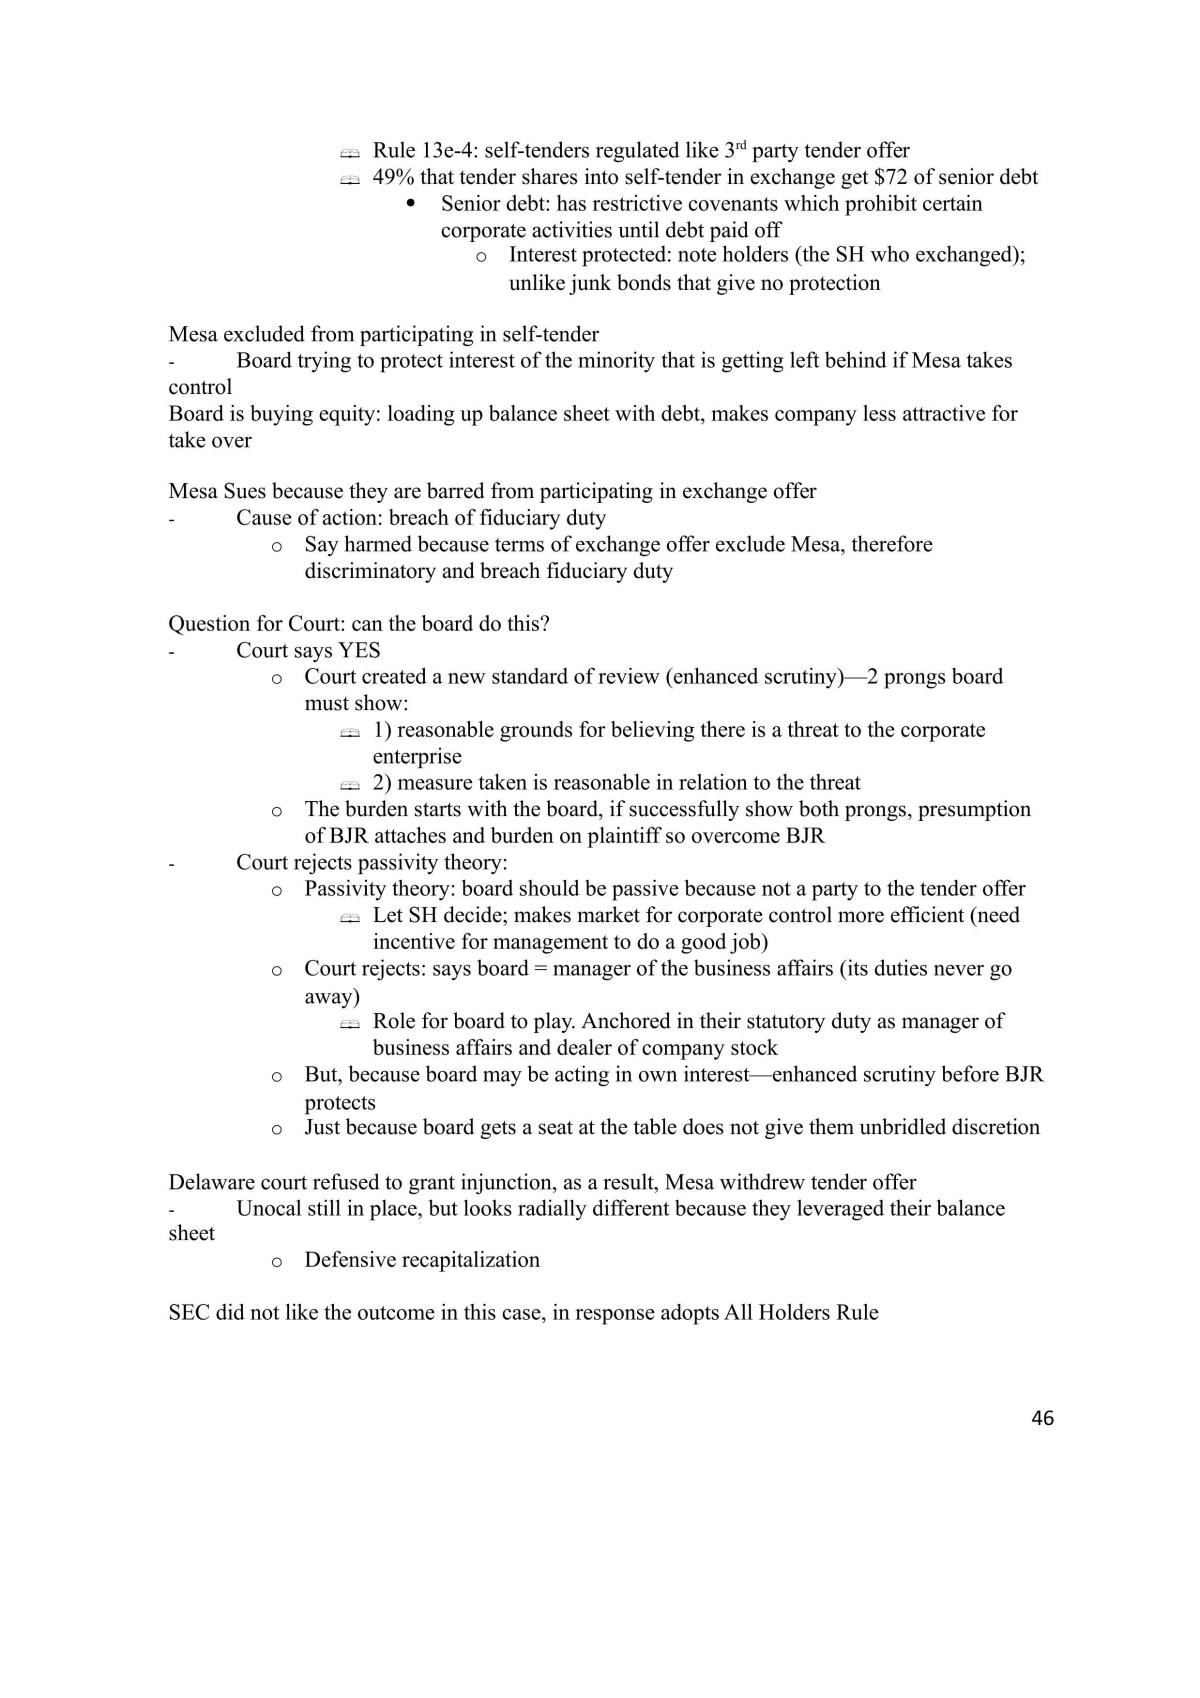 Notes for Mergers and Acquisitions - Page 46